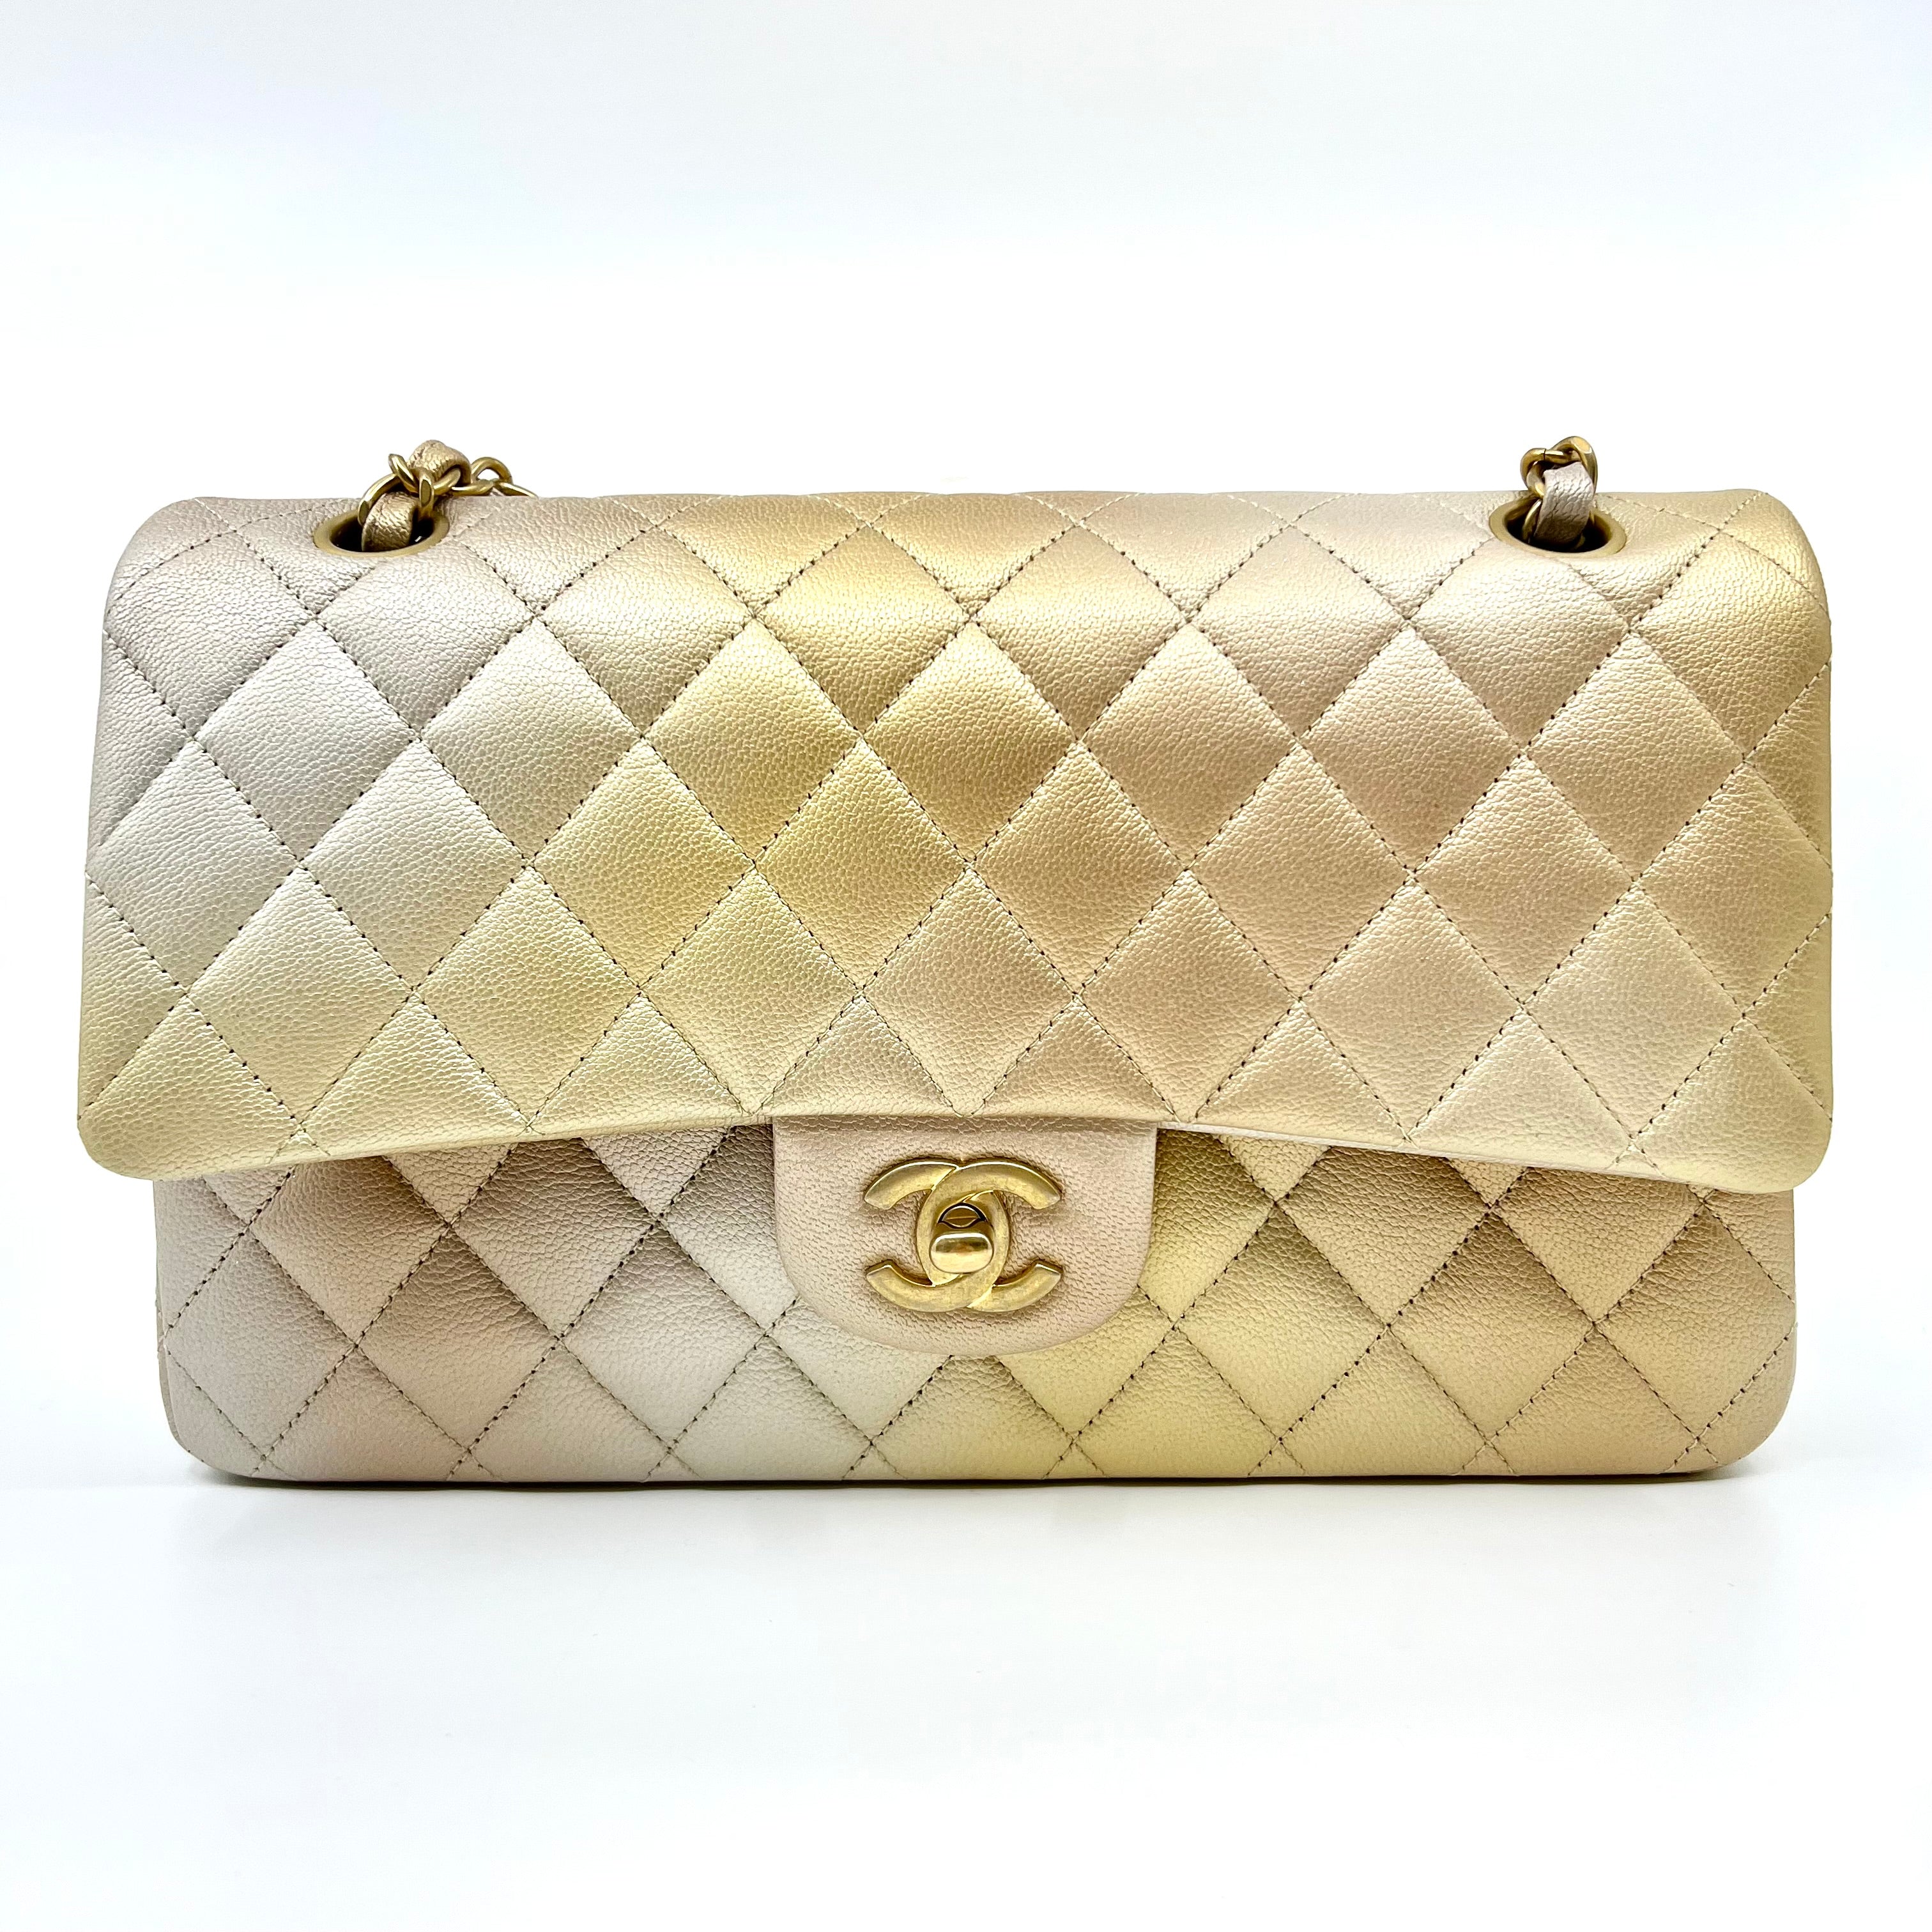 2022 Year CHANEL Classic Iridescent Lambskin Quilted Medium Double Fla